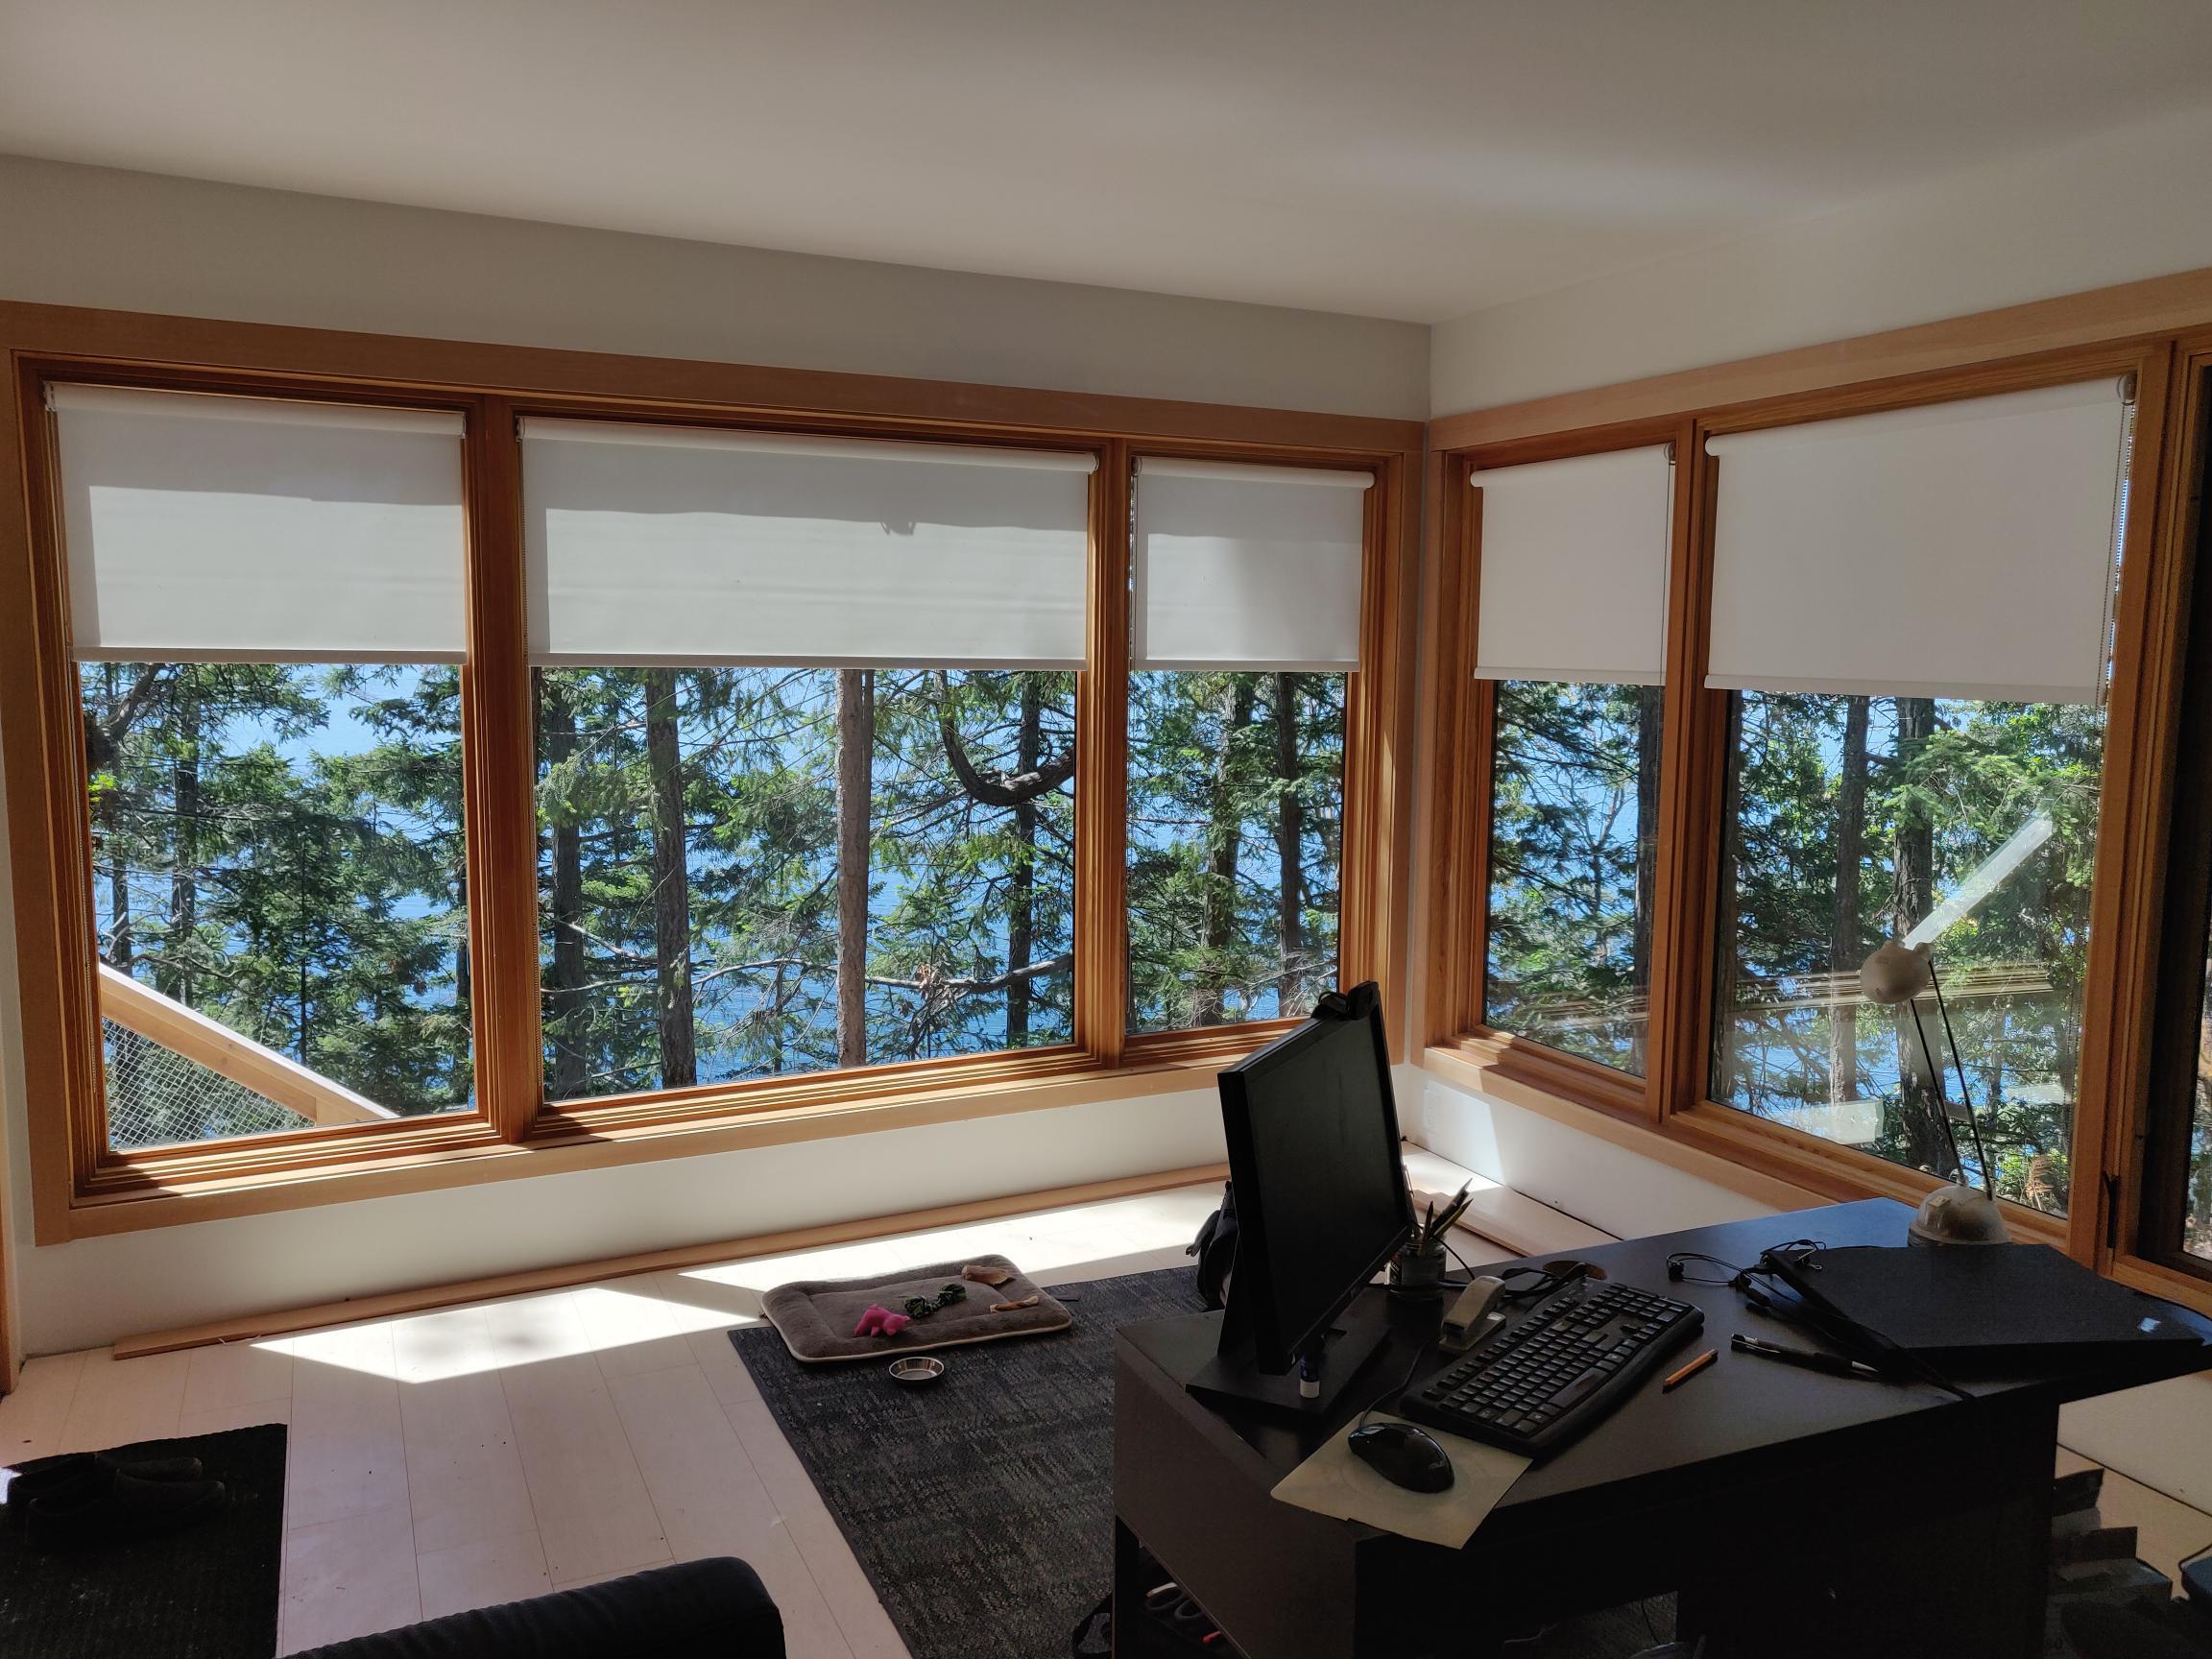 Solar Shades Budget Blinds of Comox Valley and Campbell River Courtenay (250)338-8564